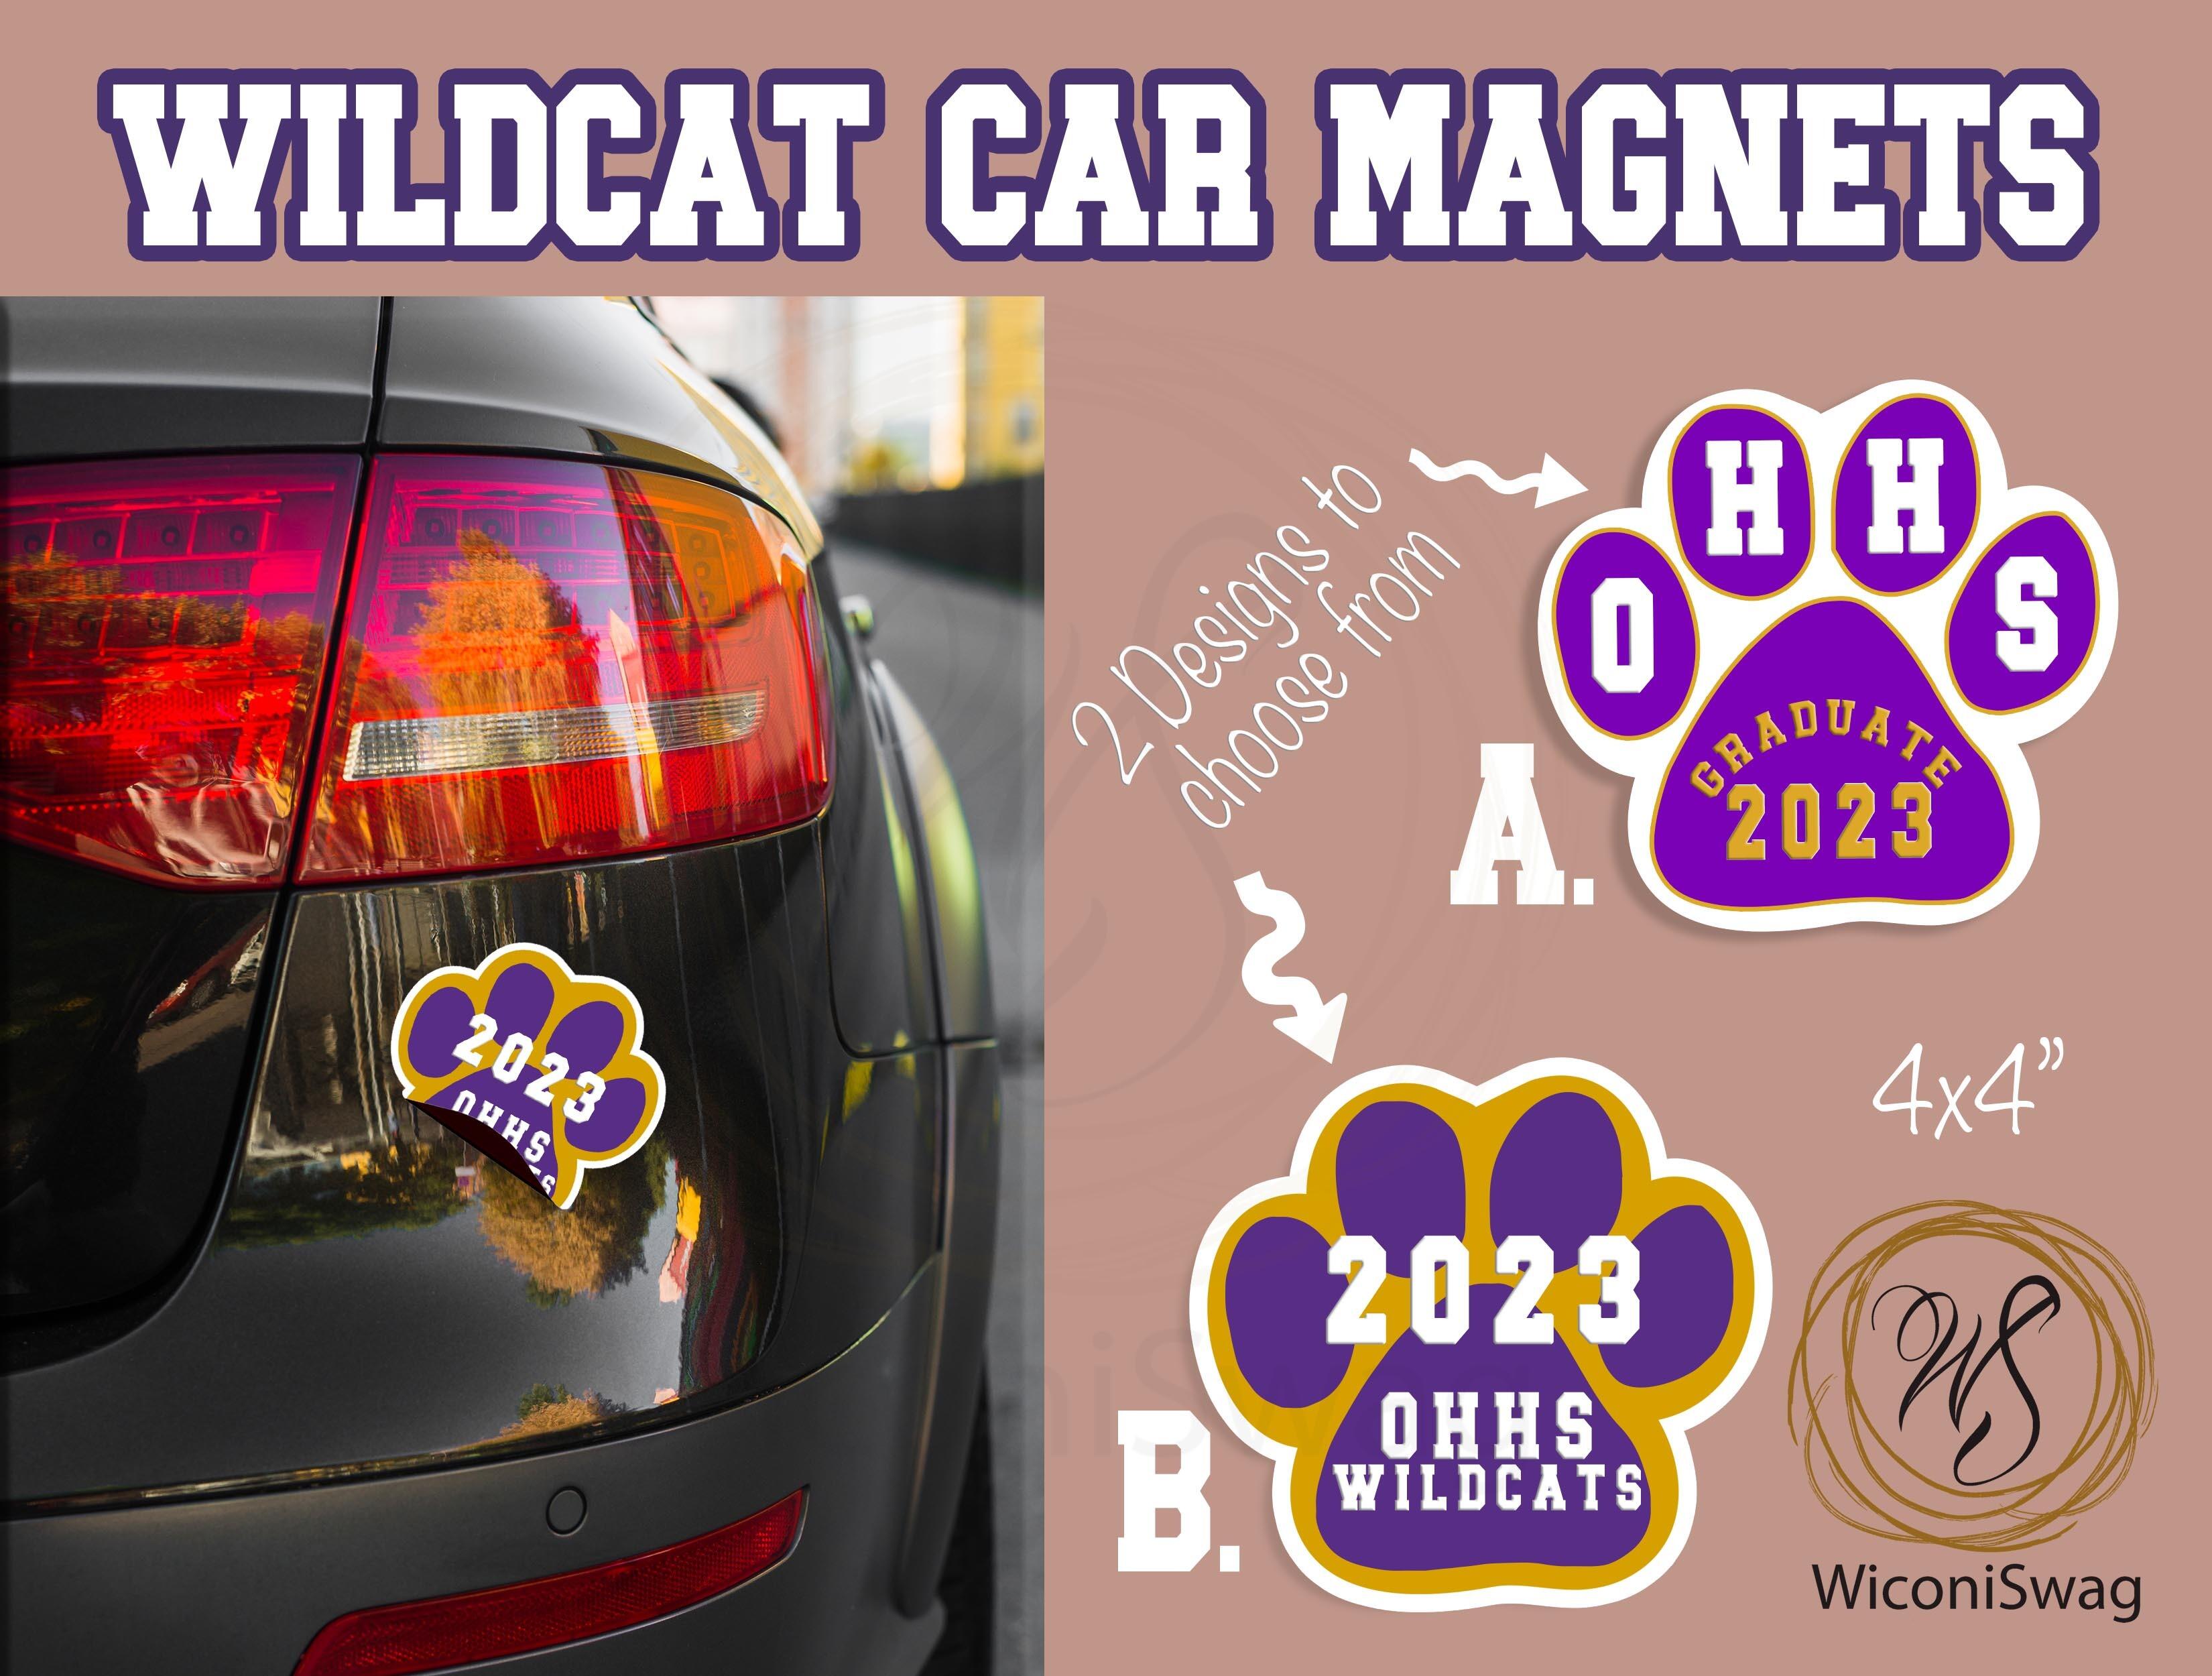 class of 2023, magnet, car, clearance, limited stock